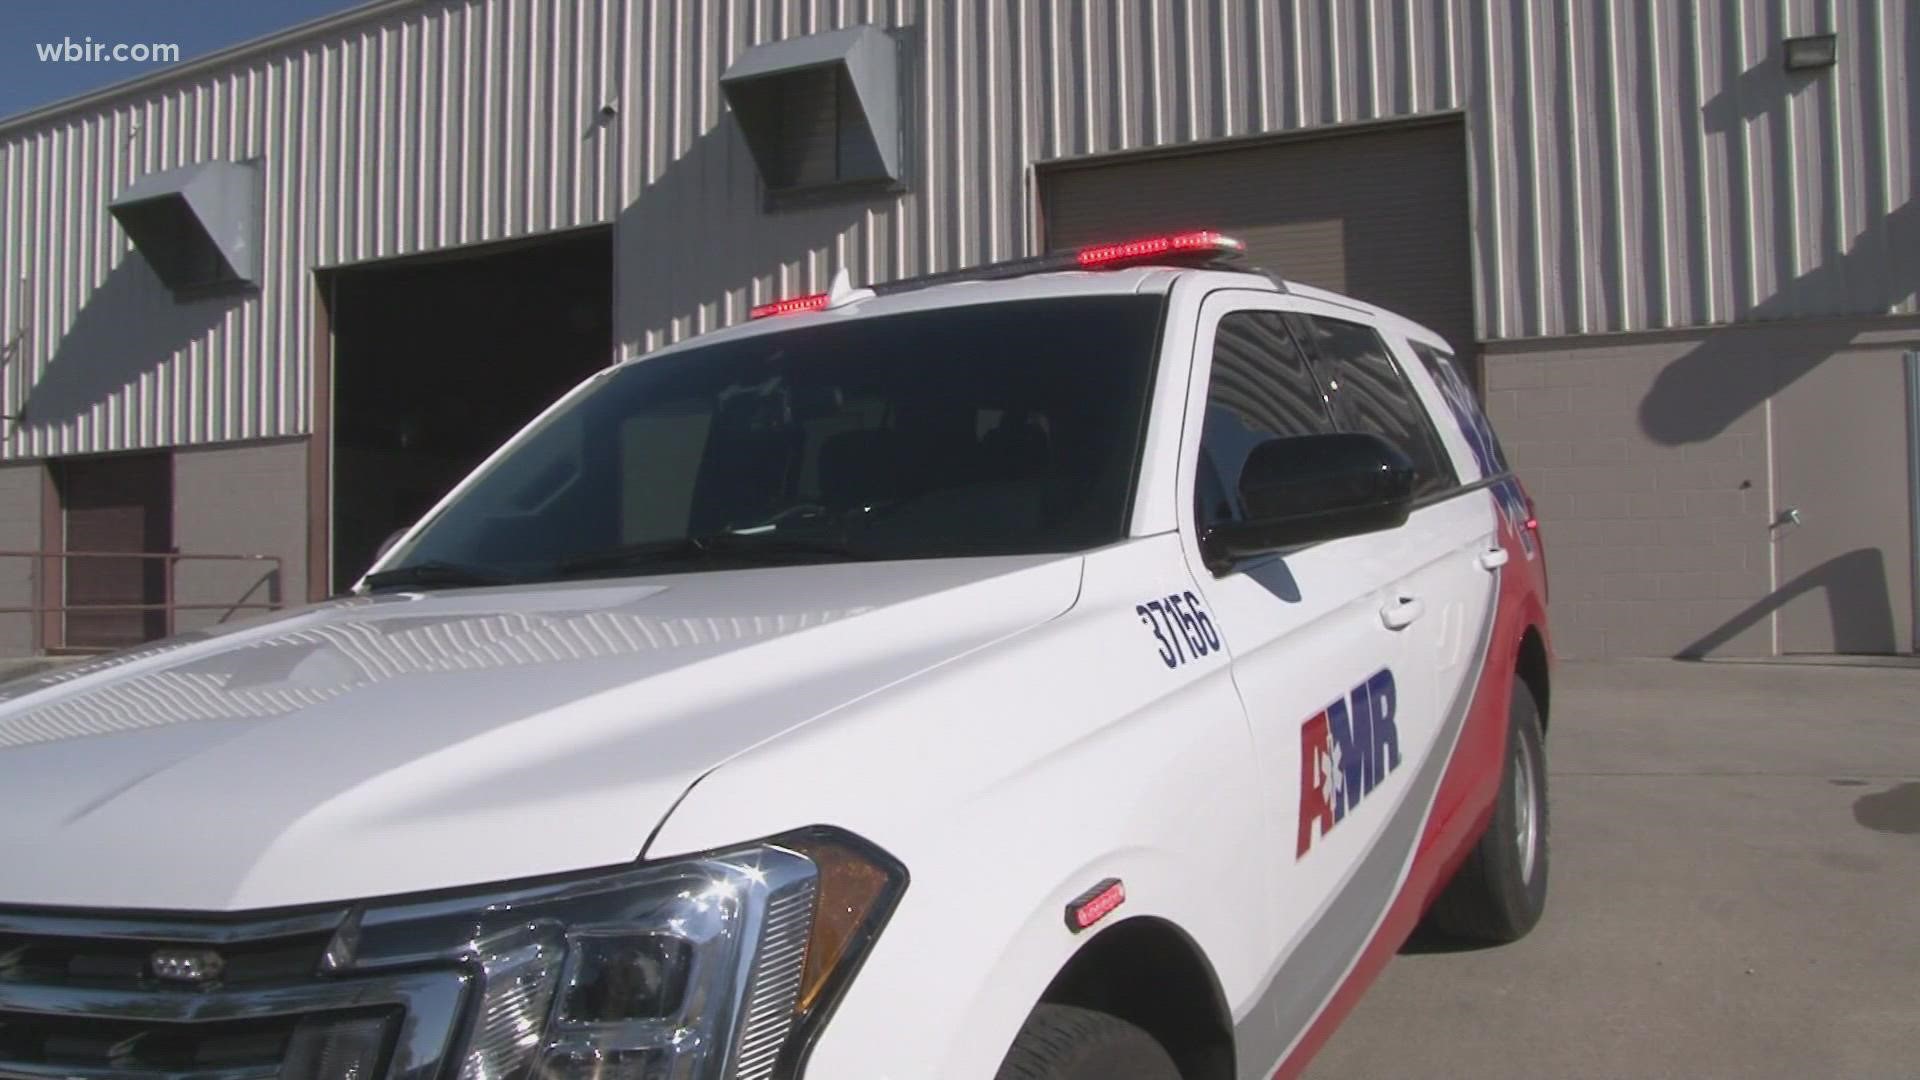 People who call 911 in Knox County may soon be connected to a nurse if their condition warrants it, instead of an ambulance being sent out.